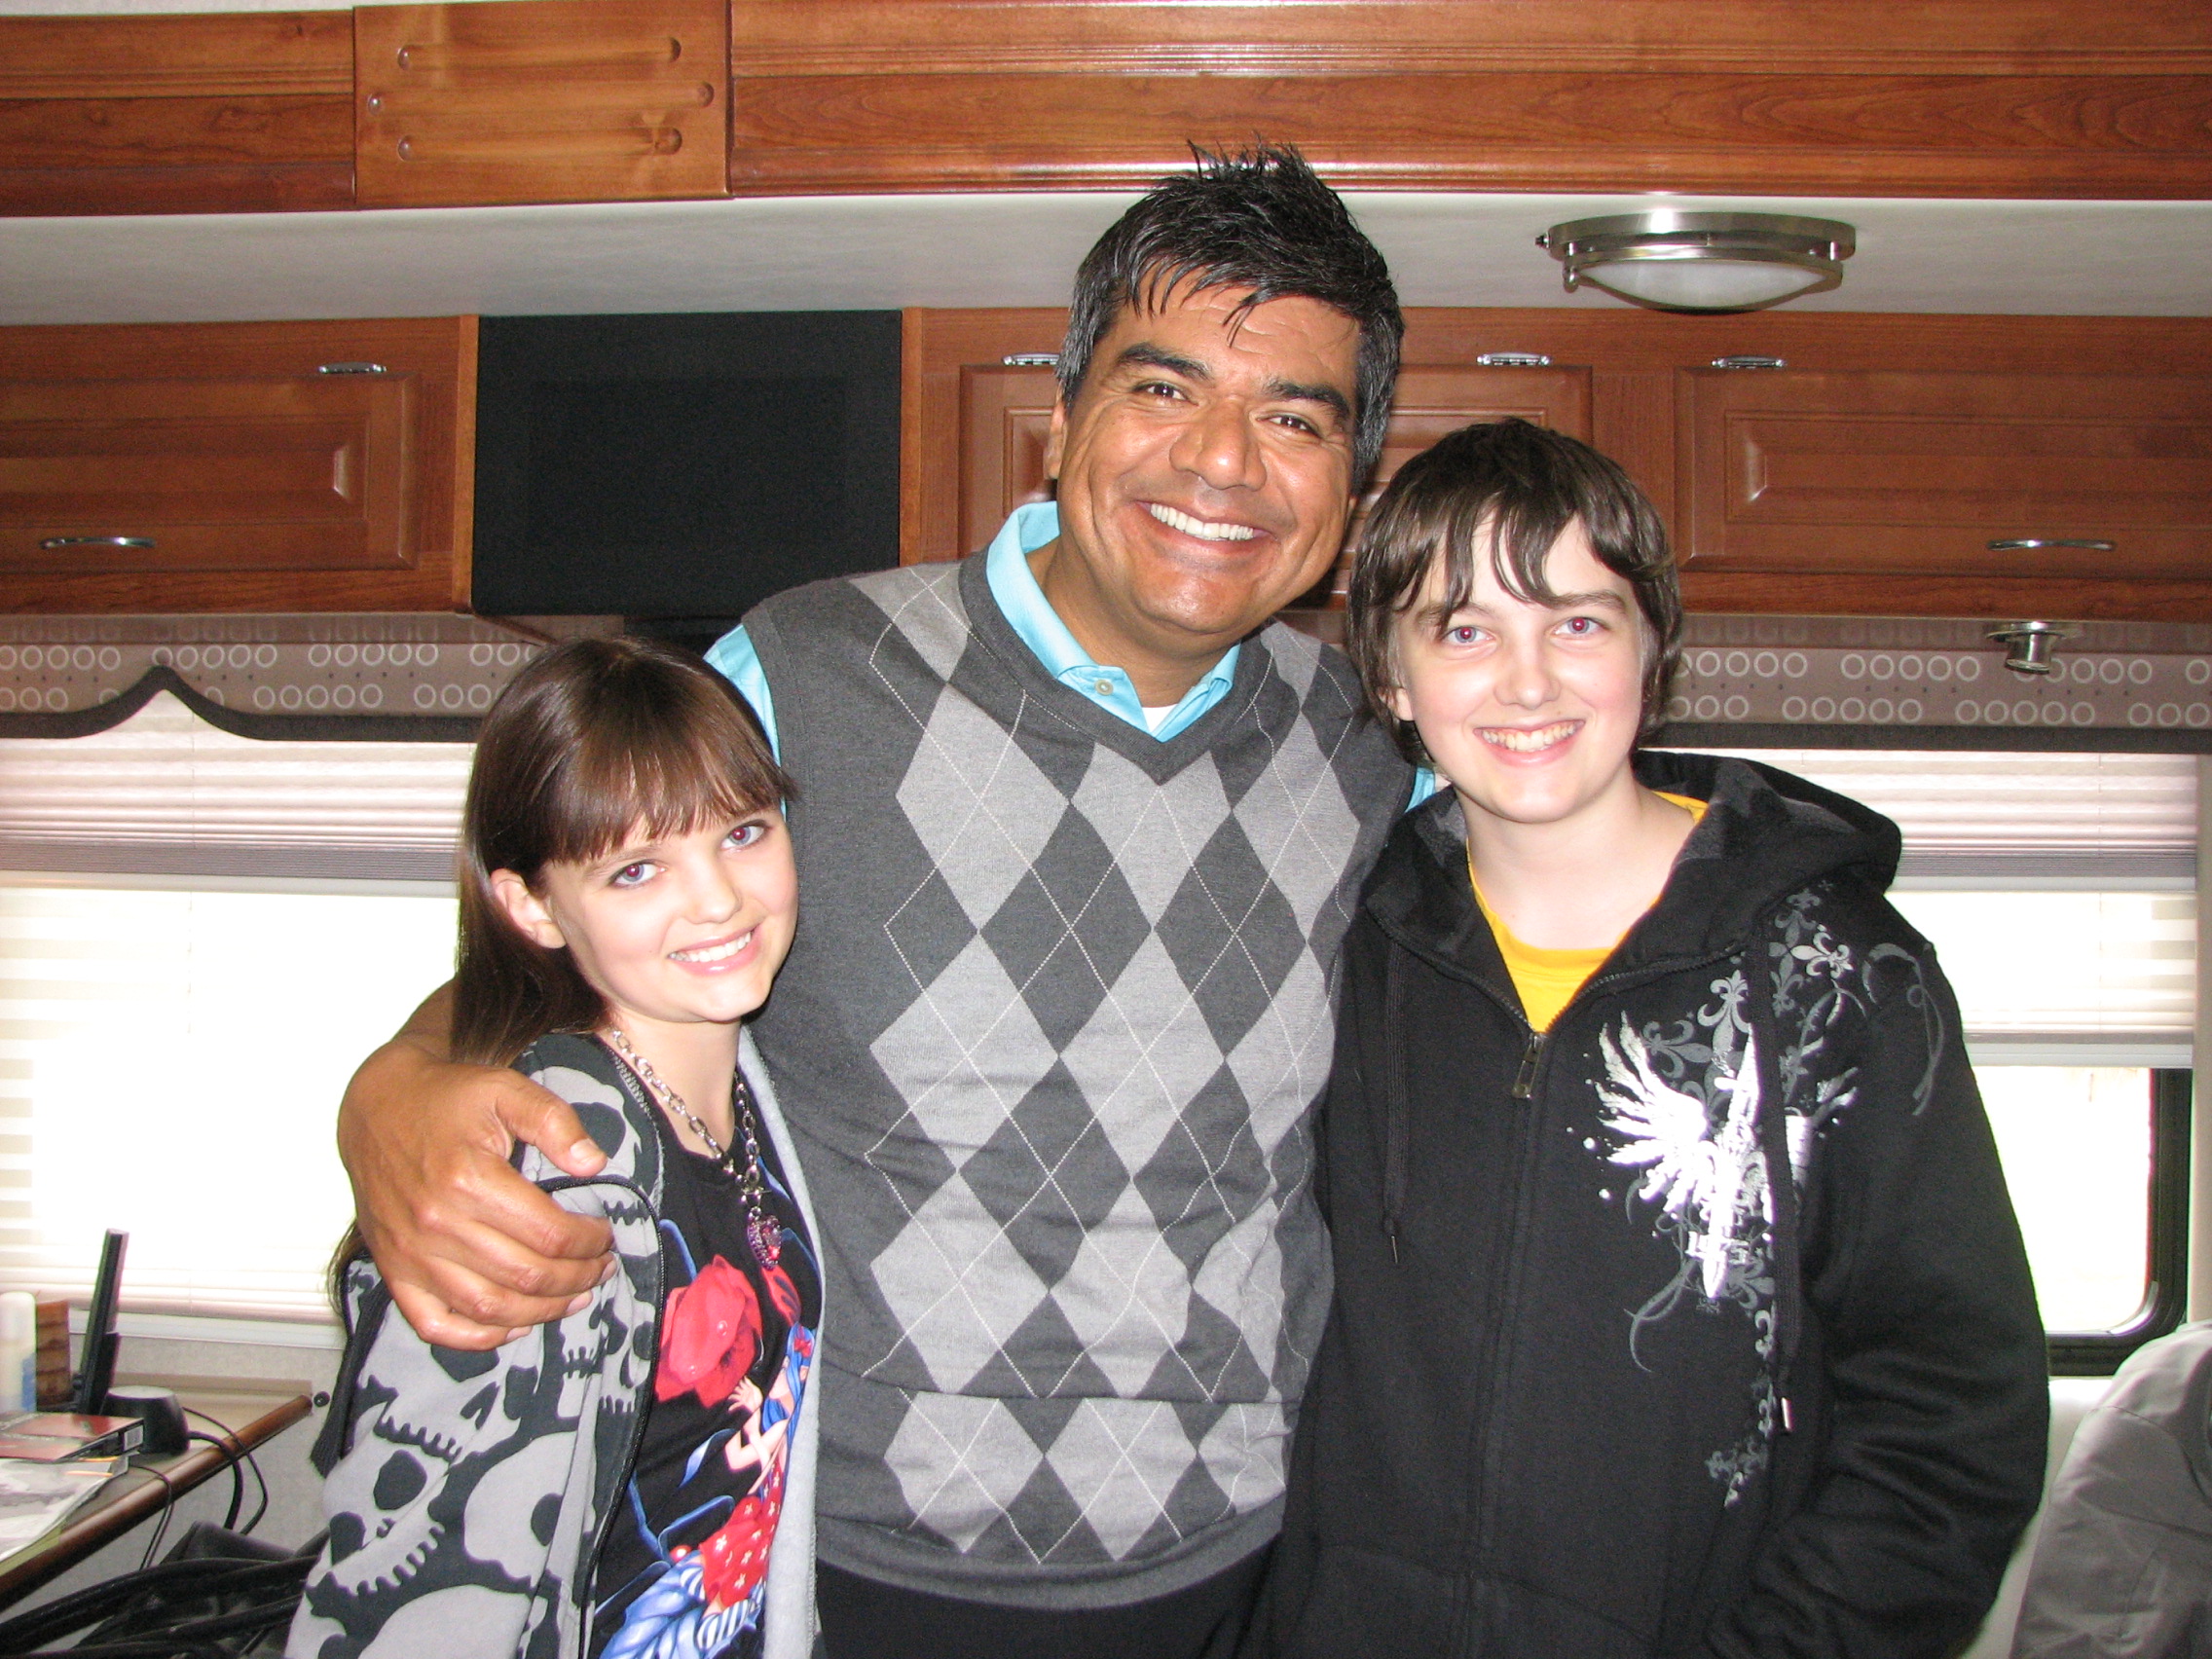 Laine and Donnie MacNeil with George Lopez on the set of Mr. Troop Mom